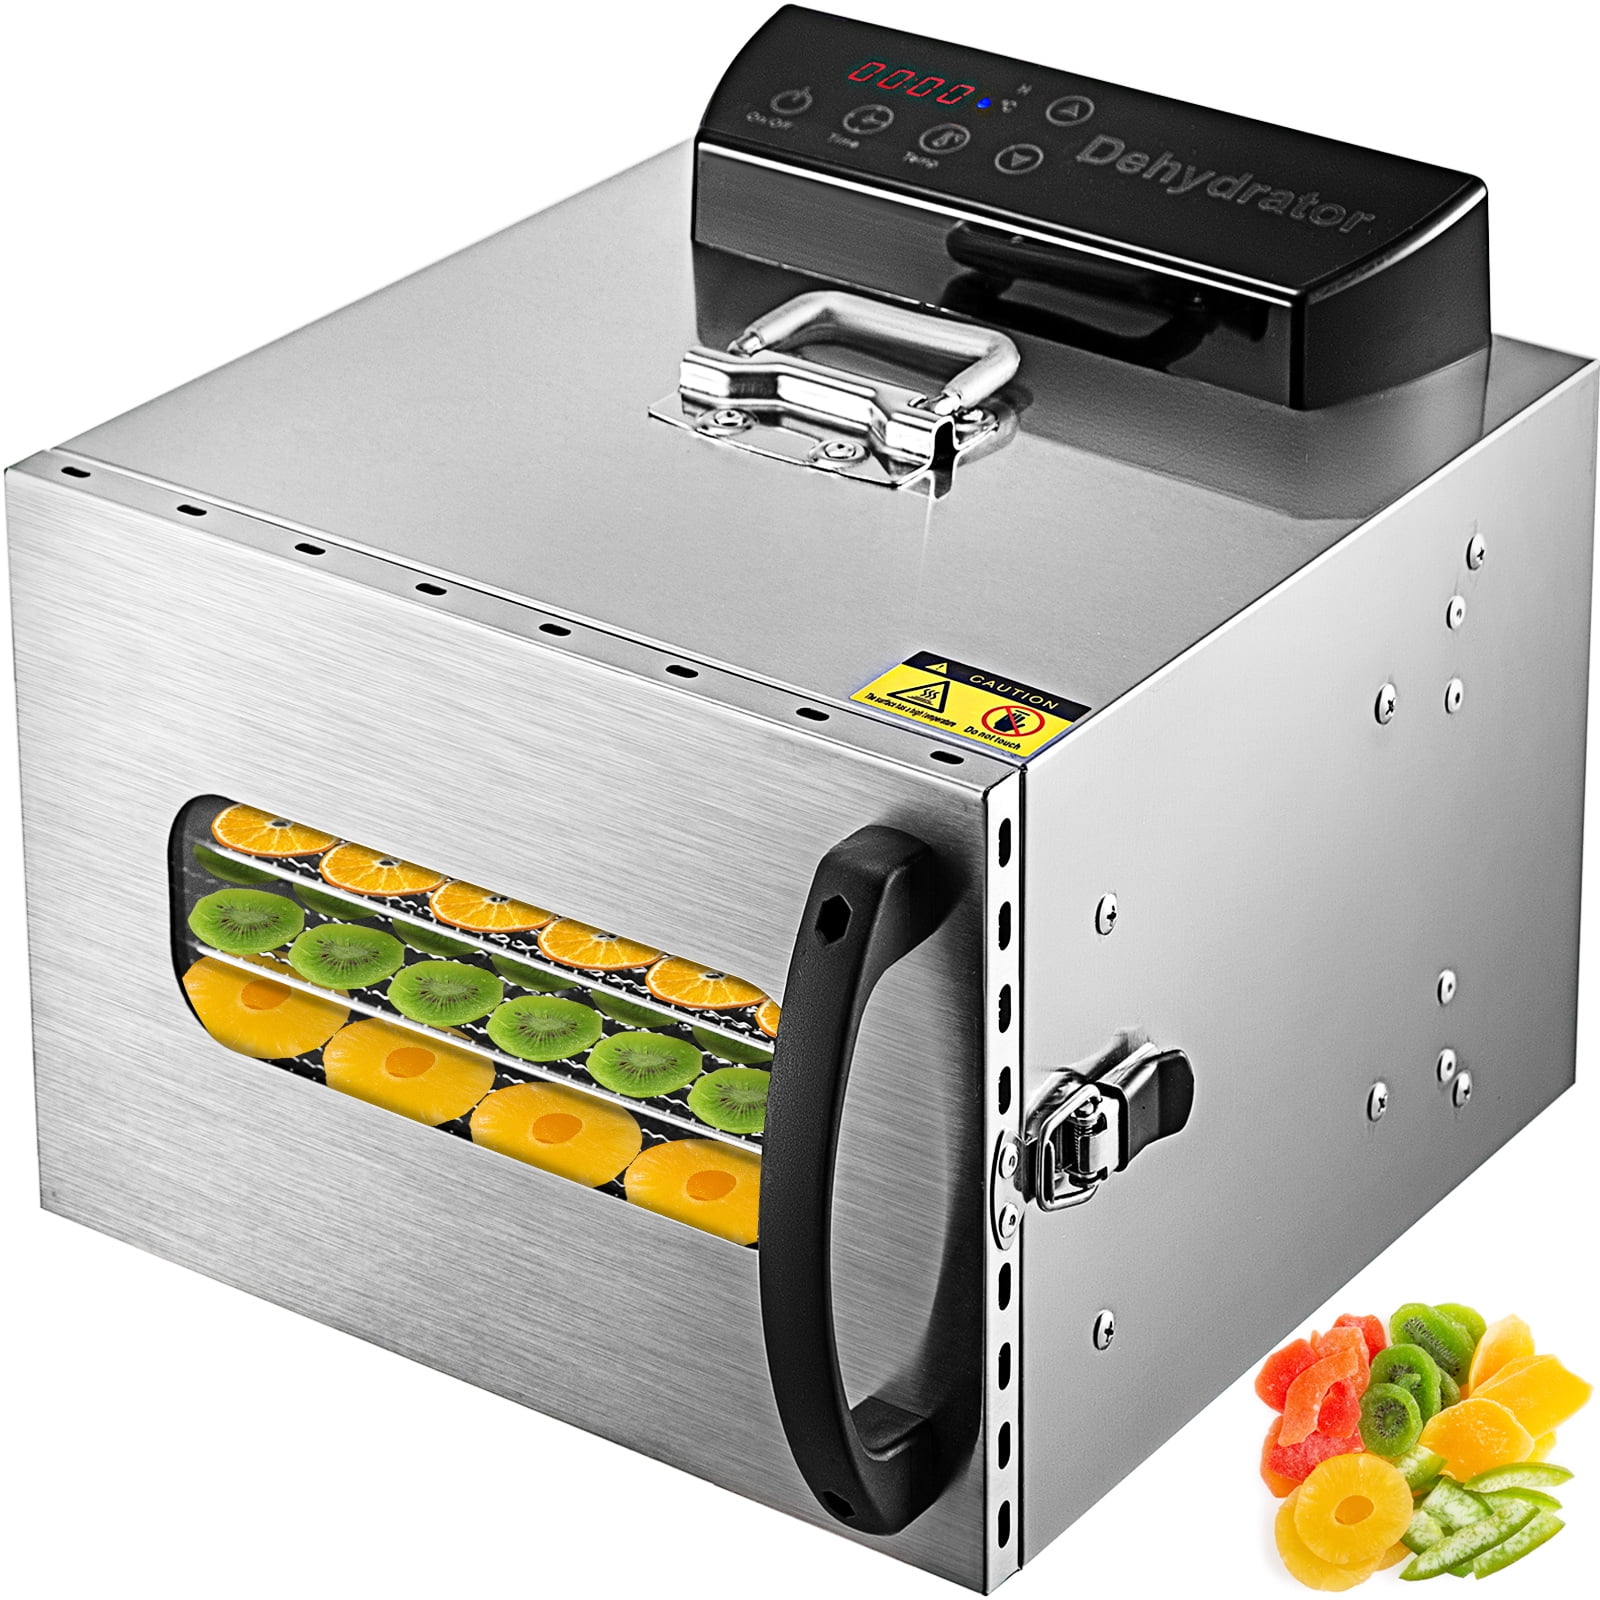 VEVOR Food Dehydrator Machine 5-Tray Fruit Dehydrator 300W Electric Food Dryer w/ Digital Adjustable Timer & Temperature for Jerky Herb Meat Beef